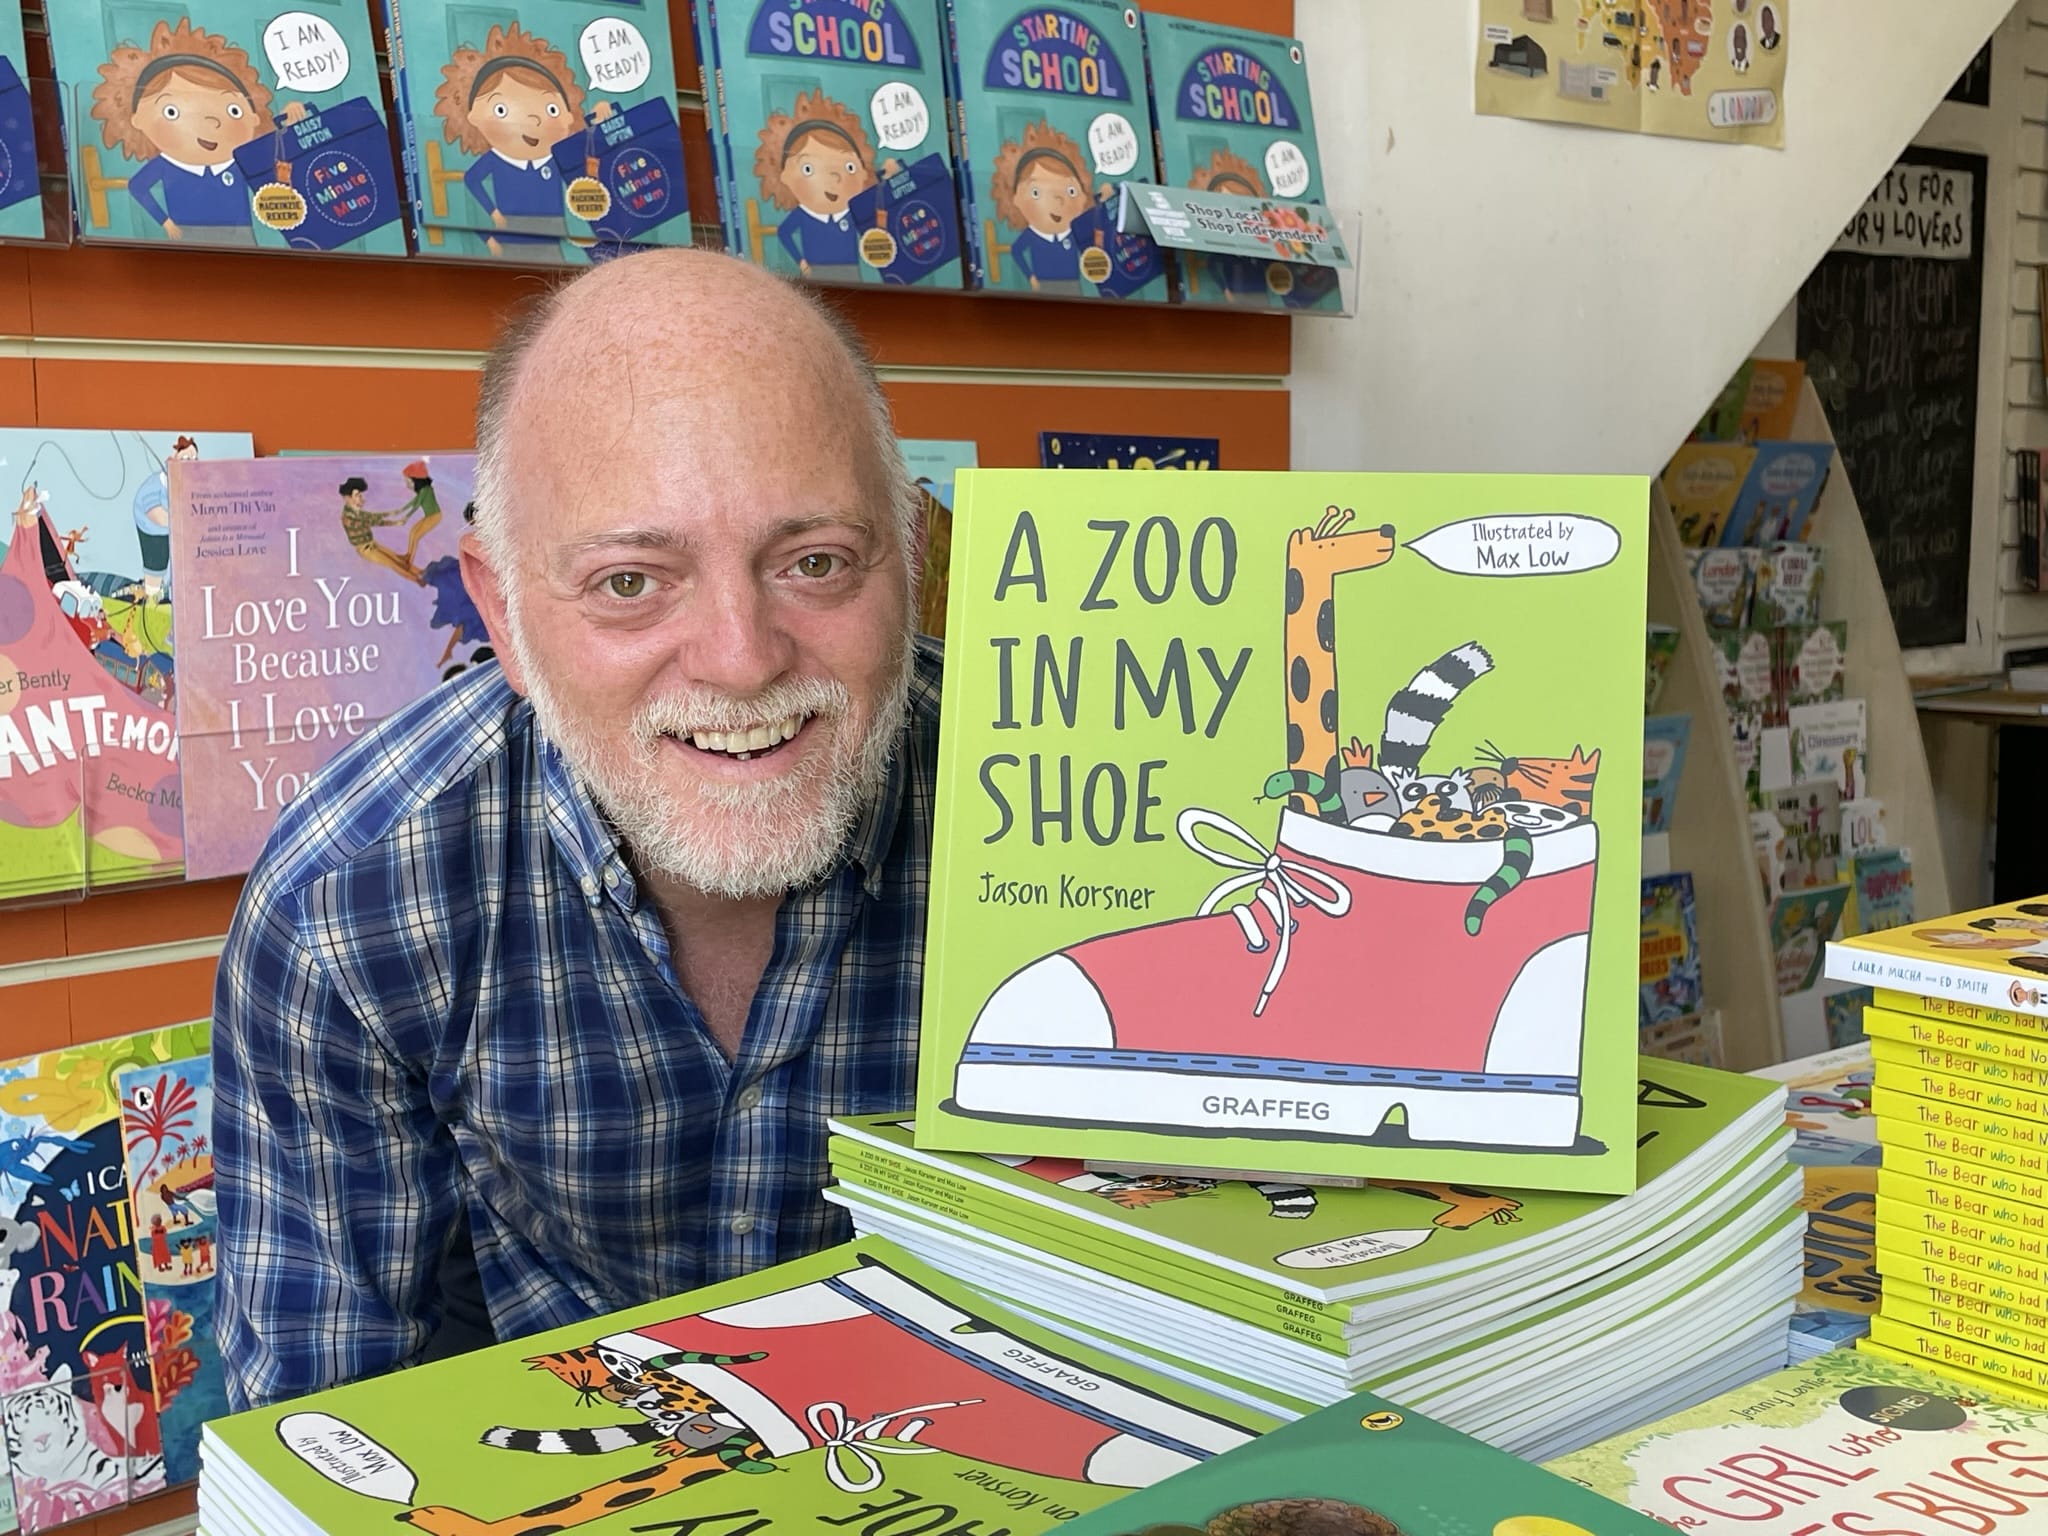 Children's author Jason Korsner poses with his book, A Zoo in my Shoe! The book is vibrant green with a red converse and giraffe on the front cover. Jason has grey hair, is smiling and wearing a blue checked shirt.